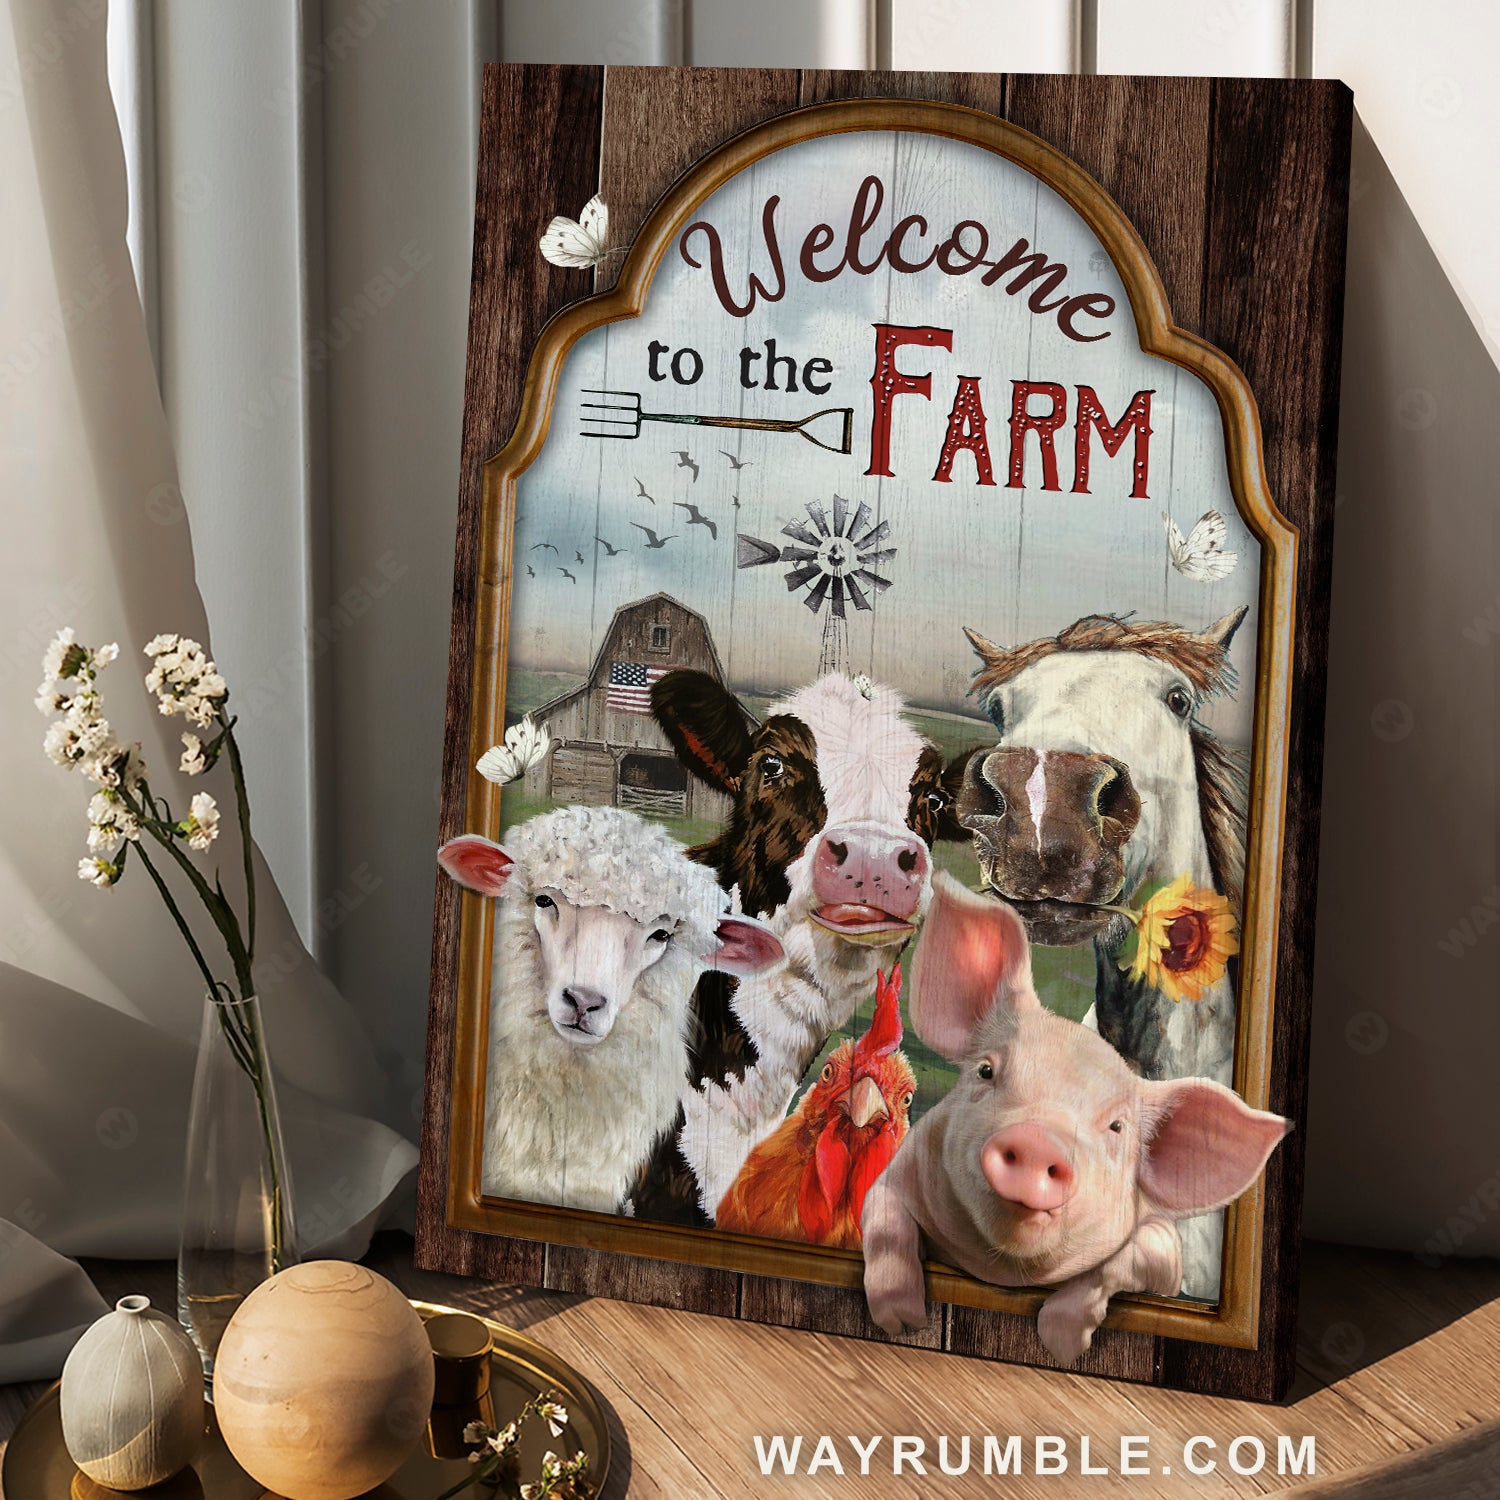 Pine Cone Farm Animals: Pig, Cow, Lamb, Rooster, Chick